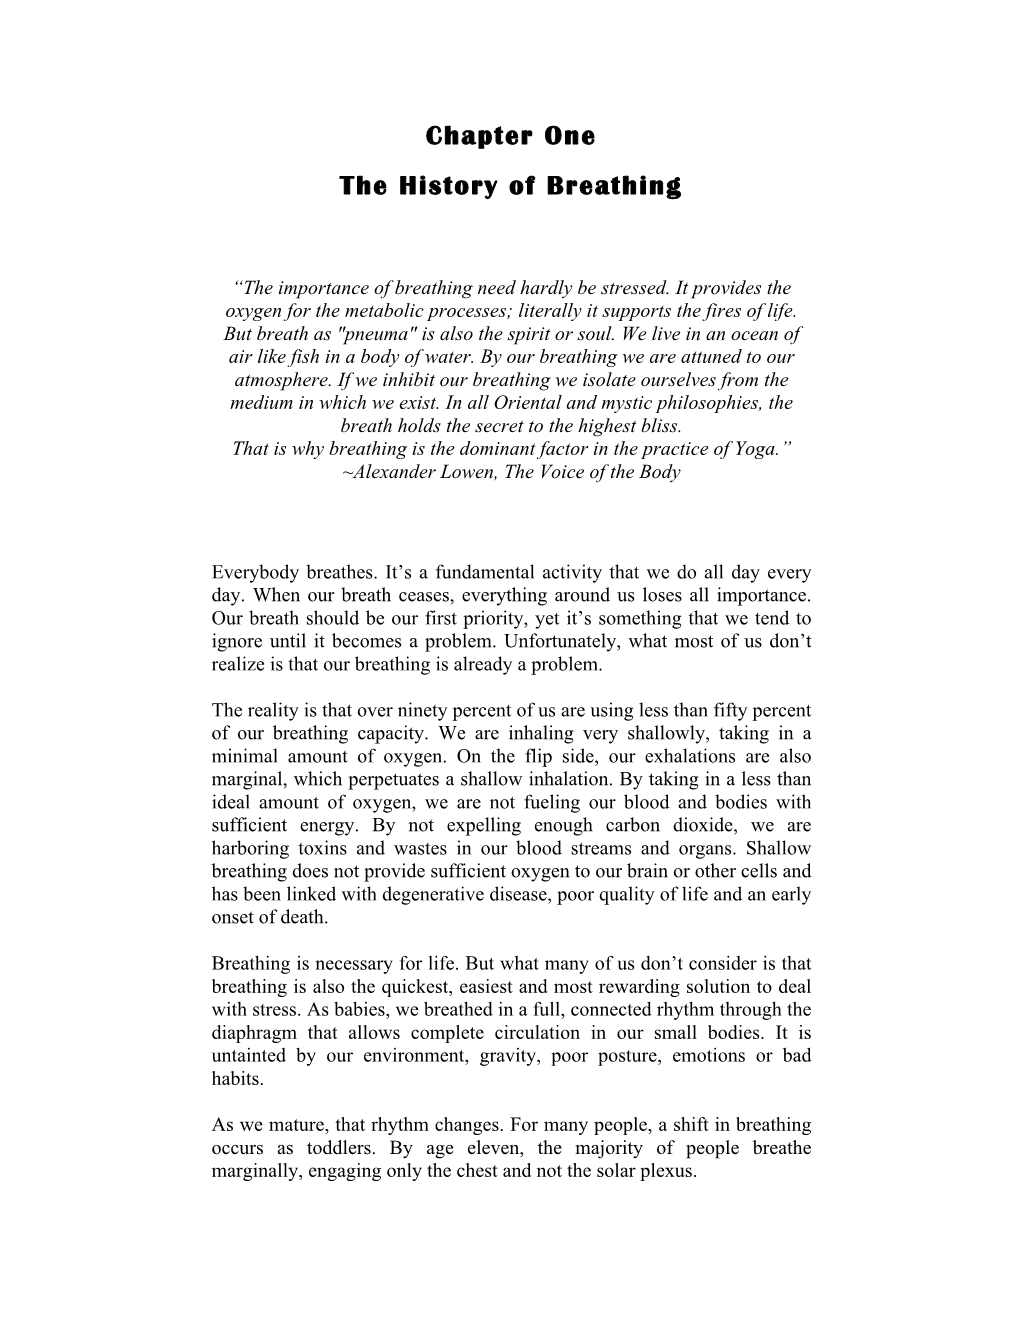 Chapter One the History of Breathing